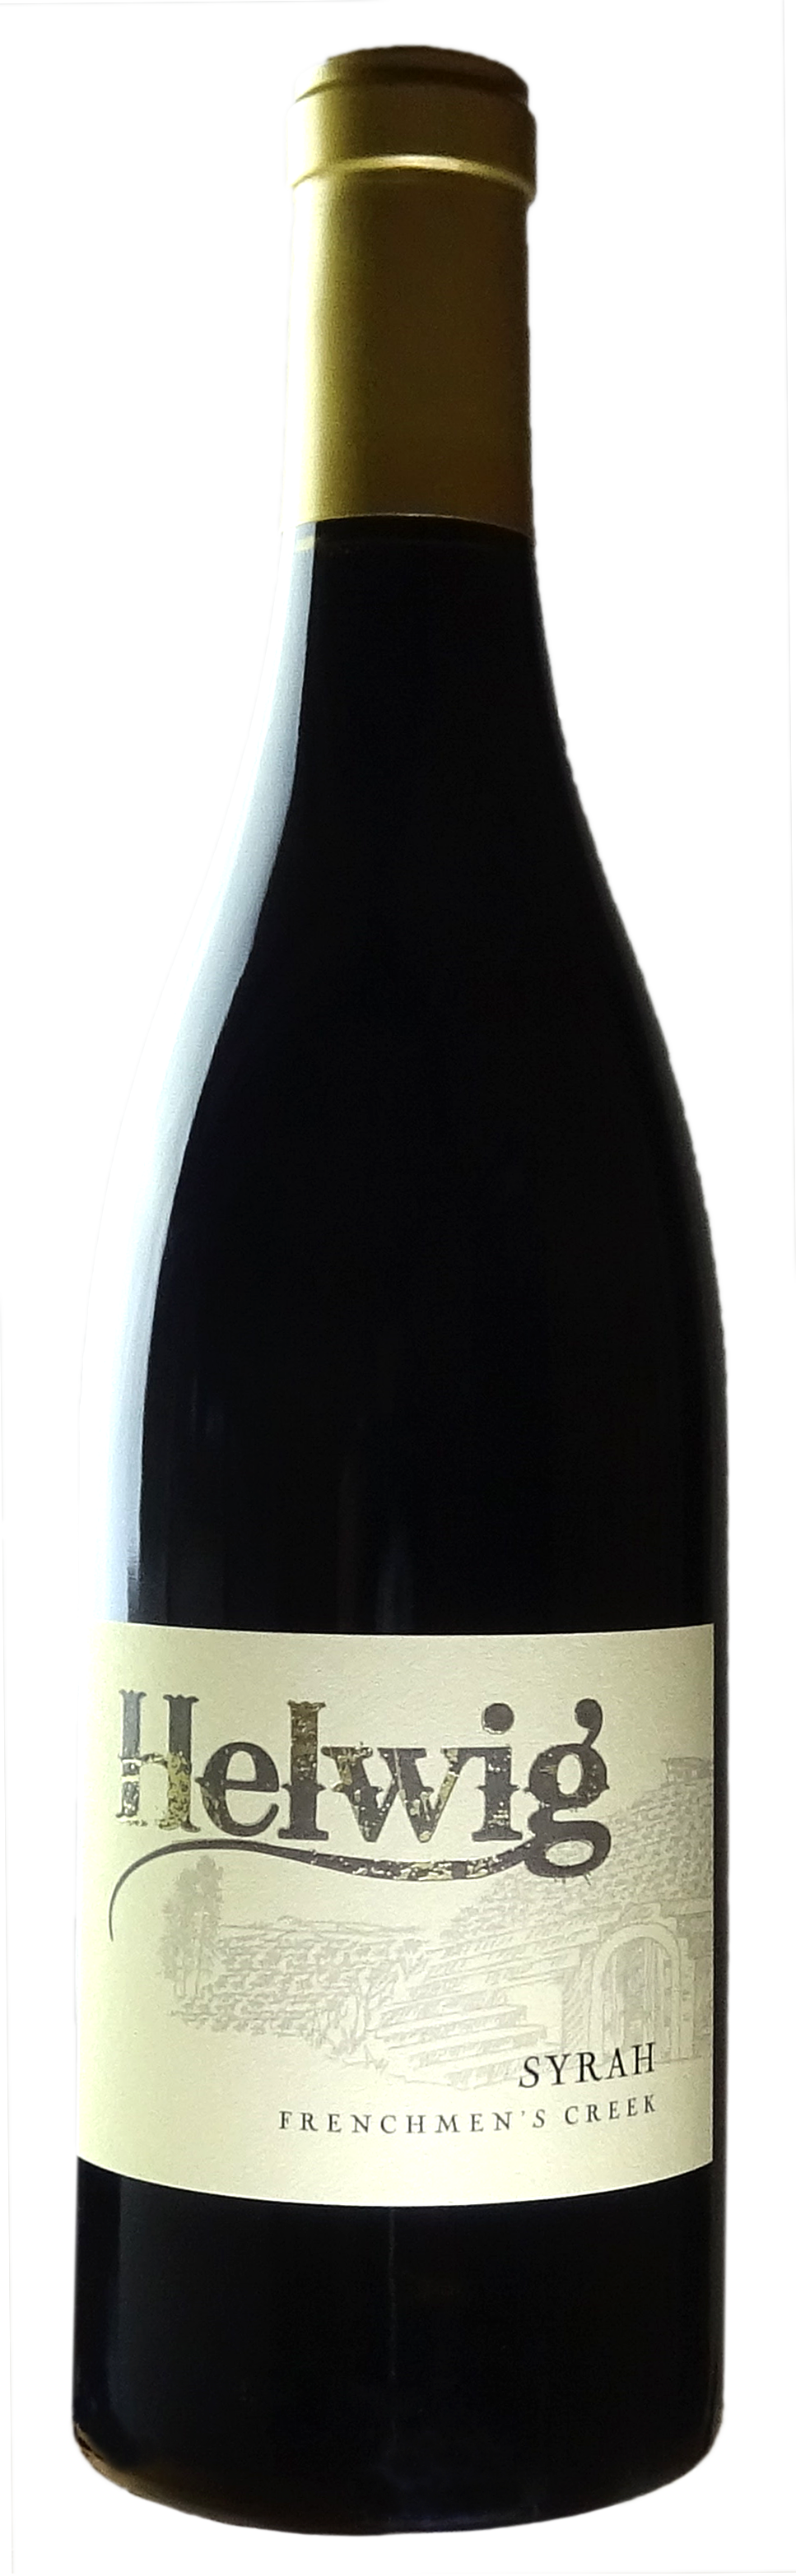 Product Image for Syrah - Frenchmen's Creek '13